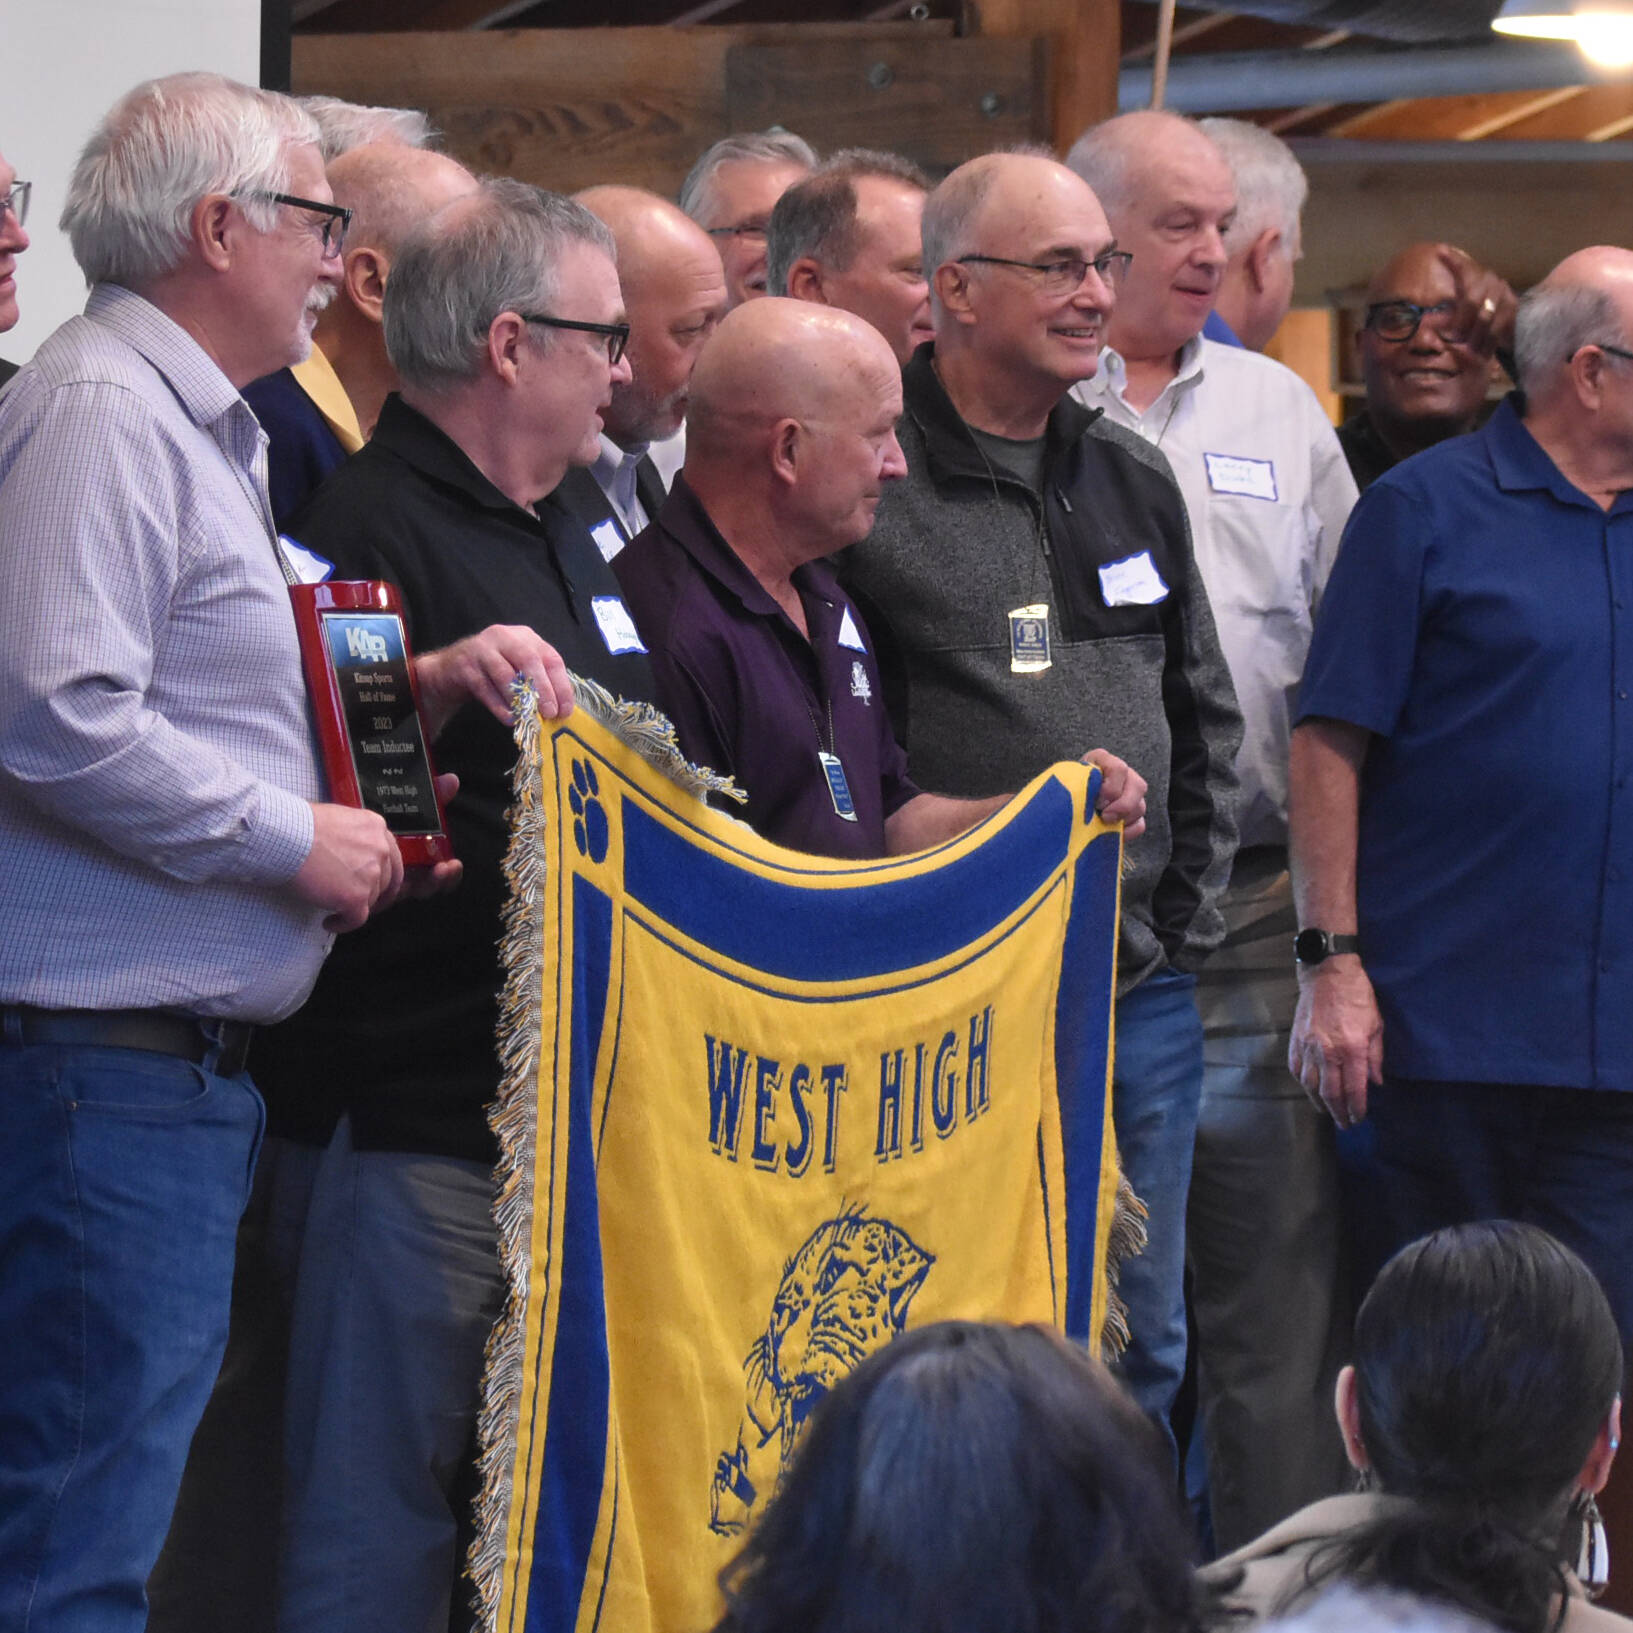 The 1973 Bremerton’s West High was honored as one of two teams.